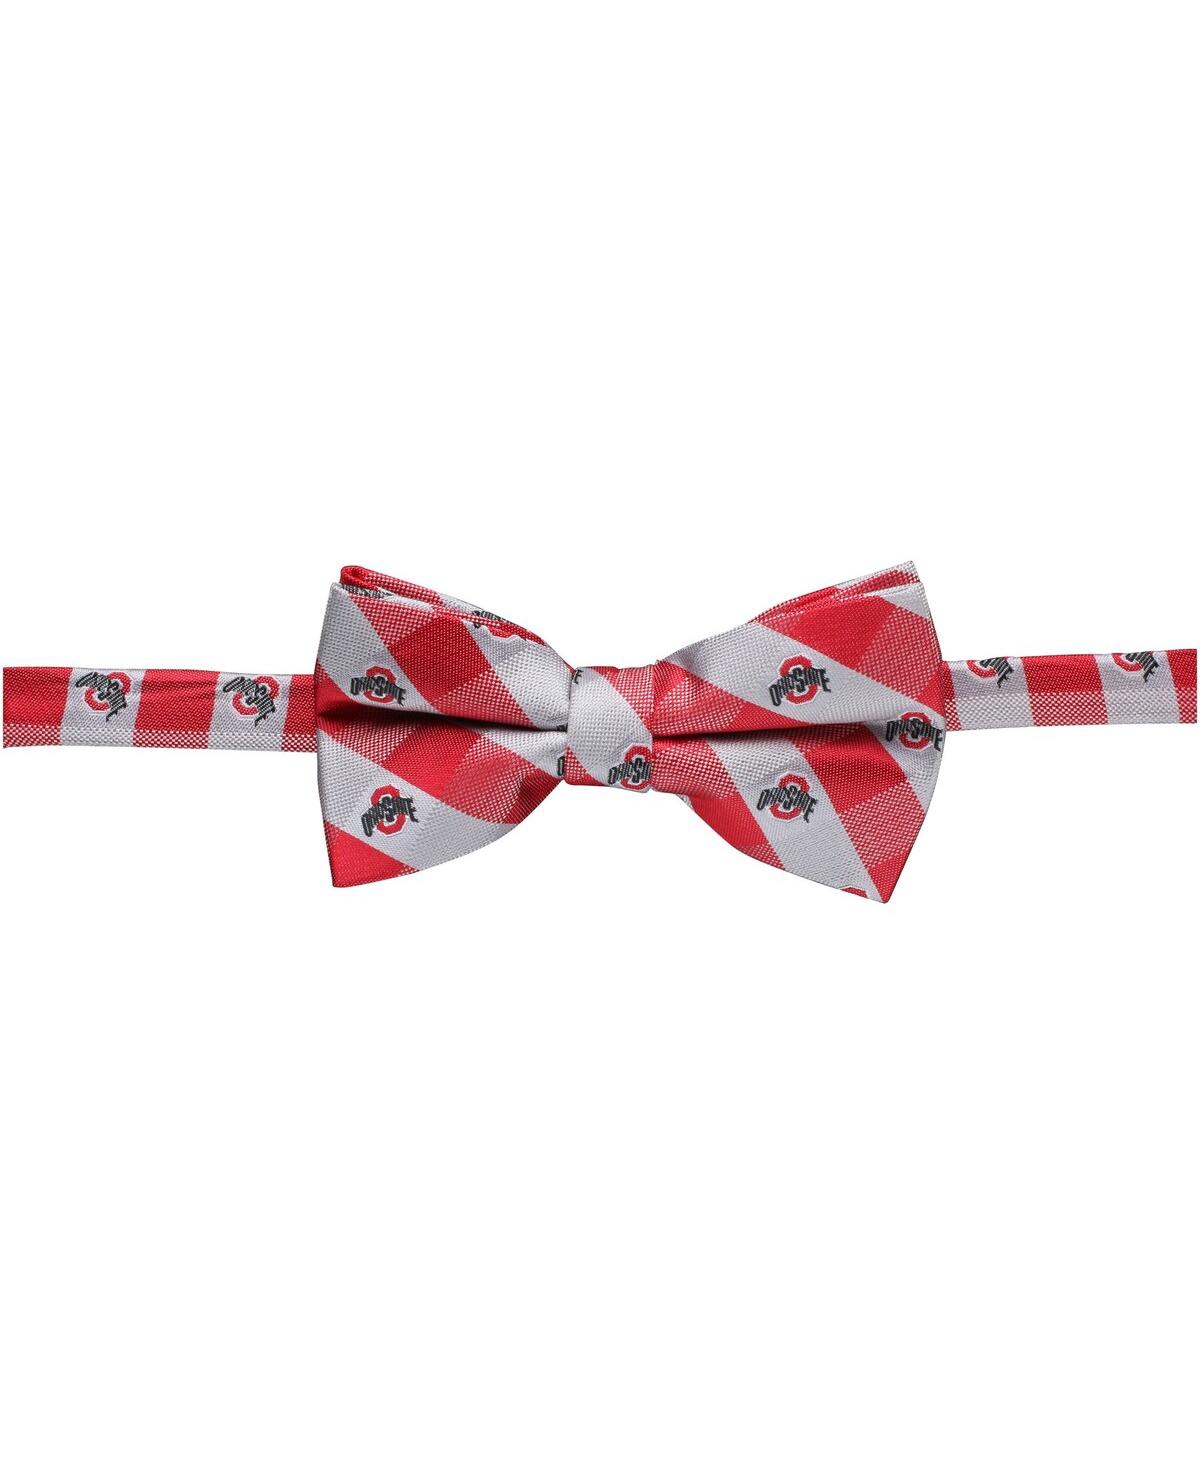 Men's Ohio State Buckeyes Check Bow Tie - Red, Gray